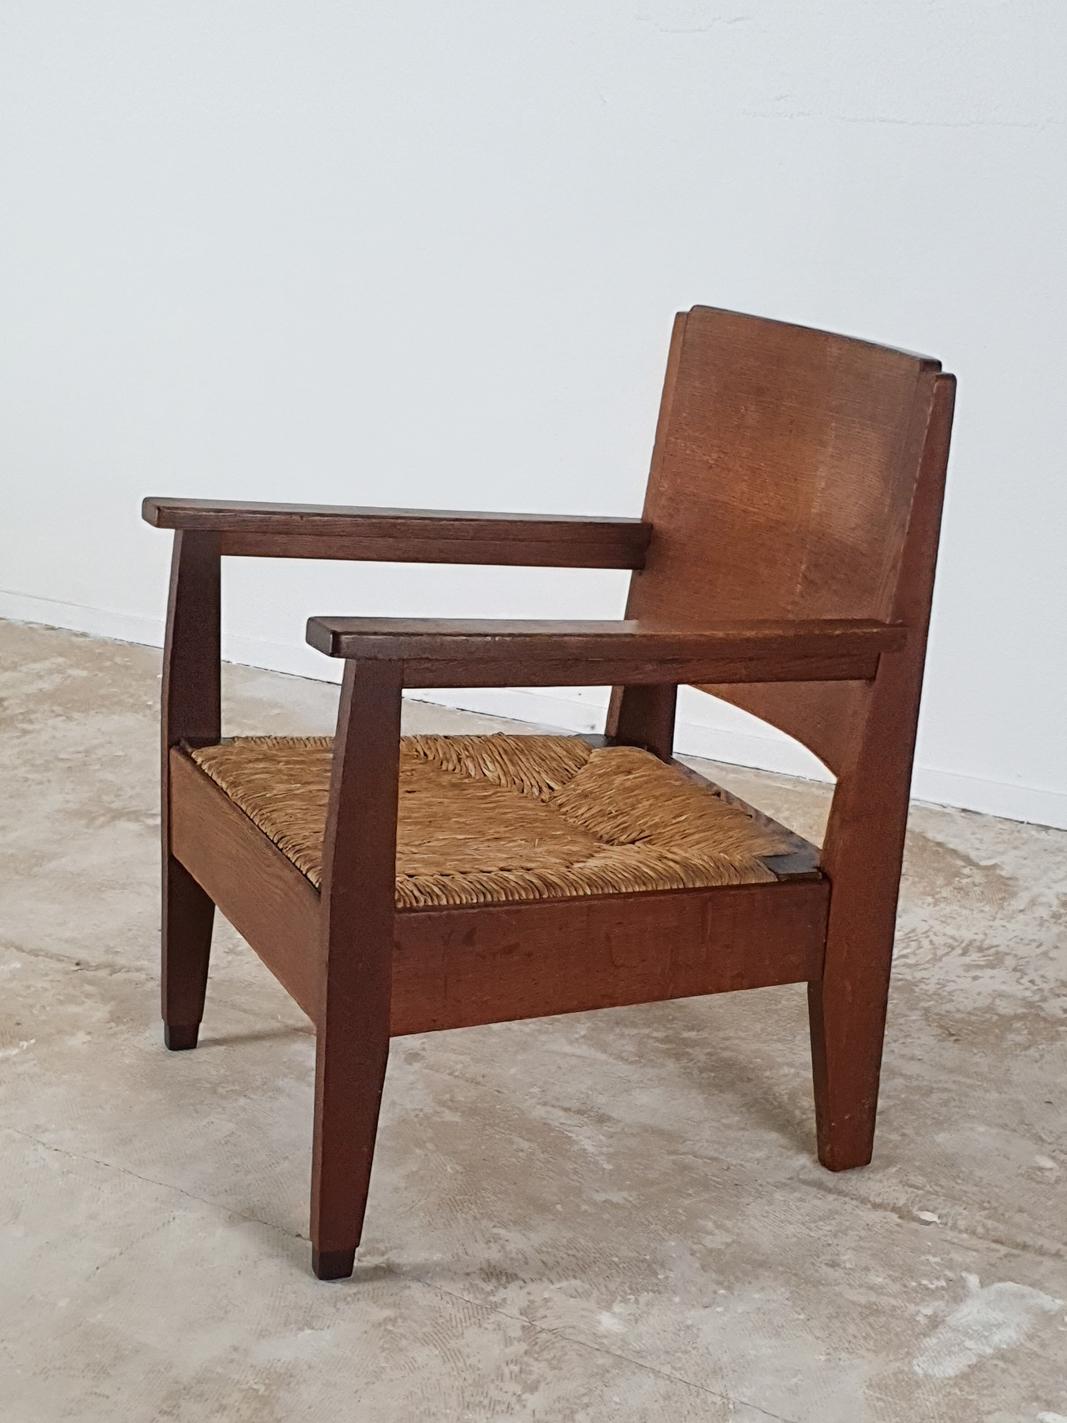 Low Chair by Frits Spanjaard 'Attributed' 1